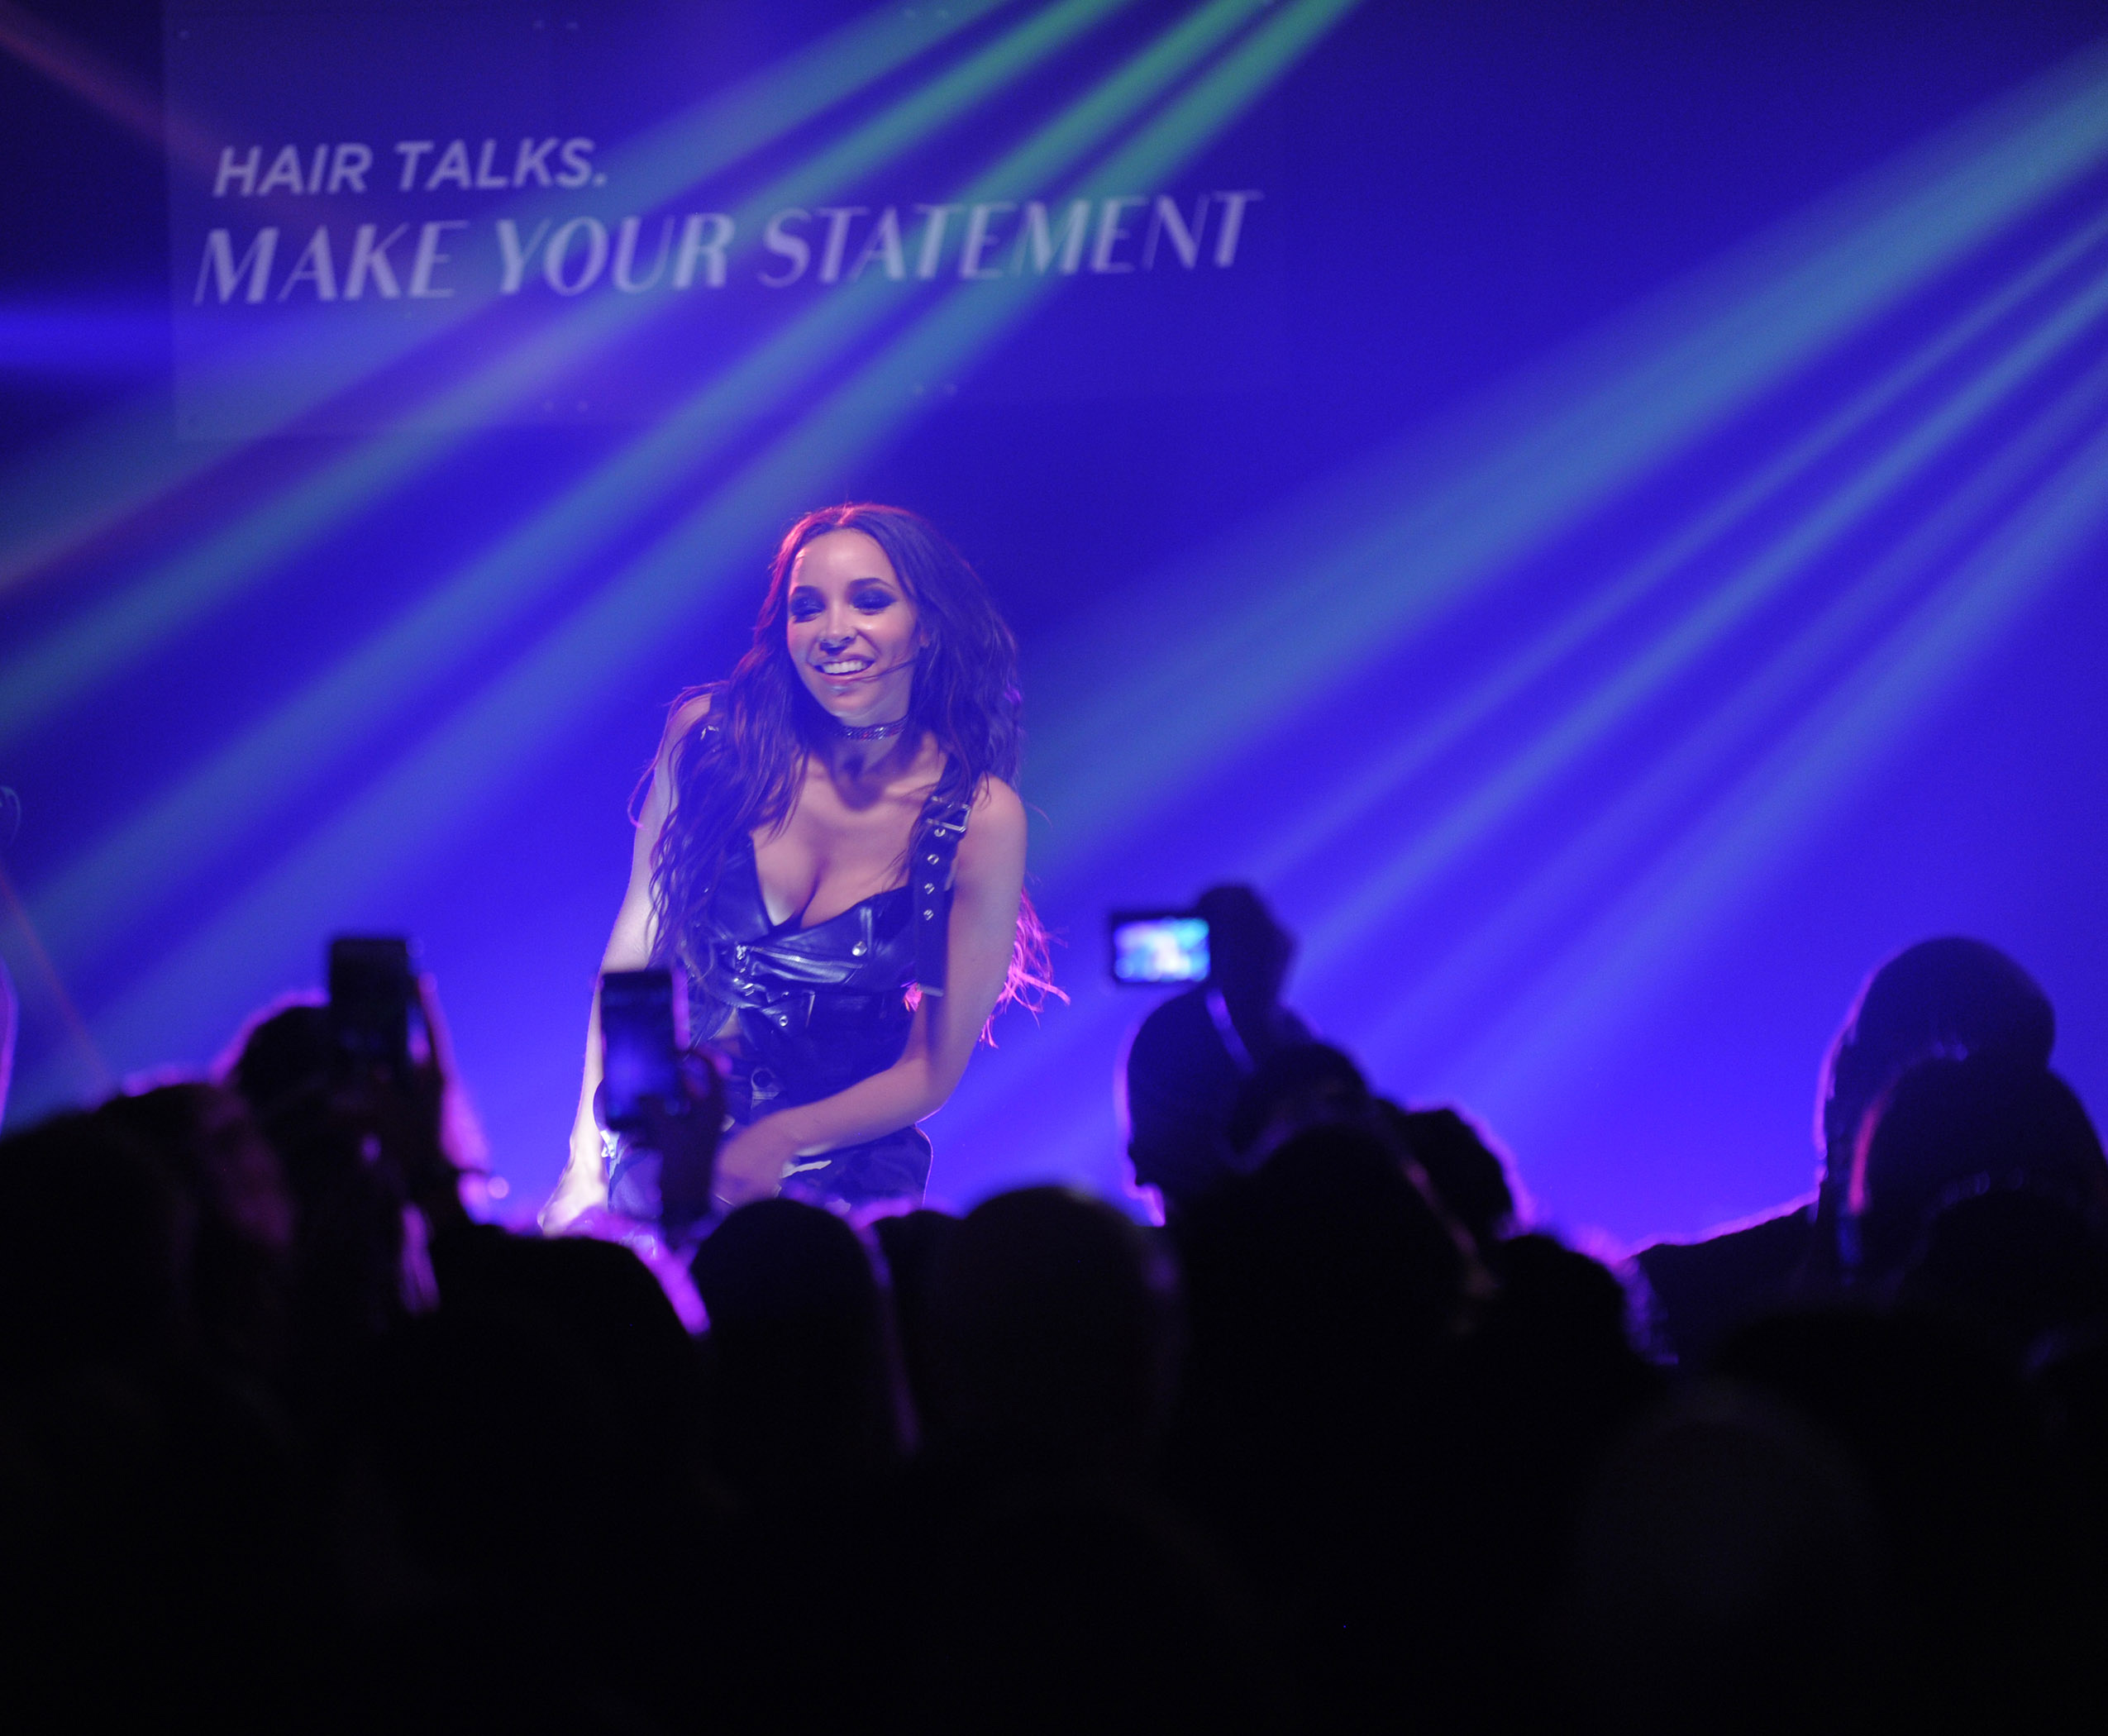 Tinashe on stage for the new John Frieda® Hair Care campaign, #HairTalks in NYC